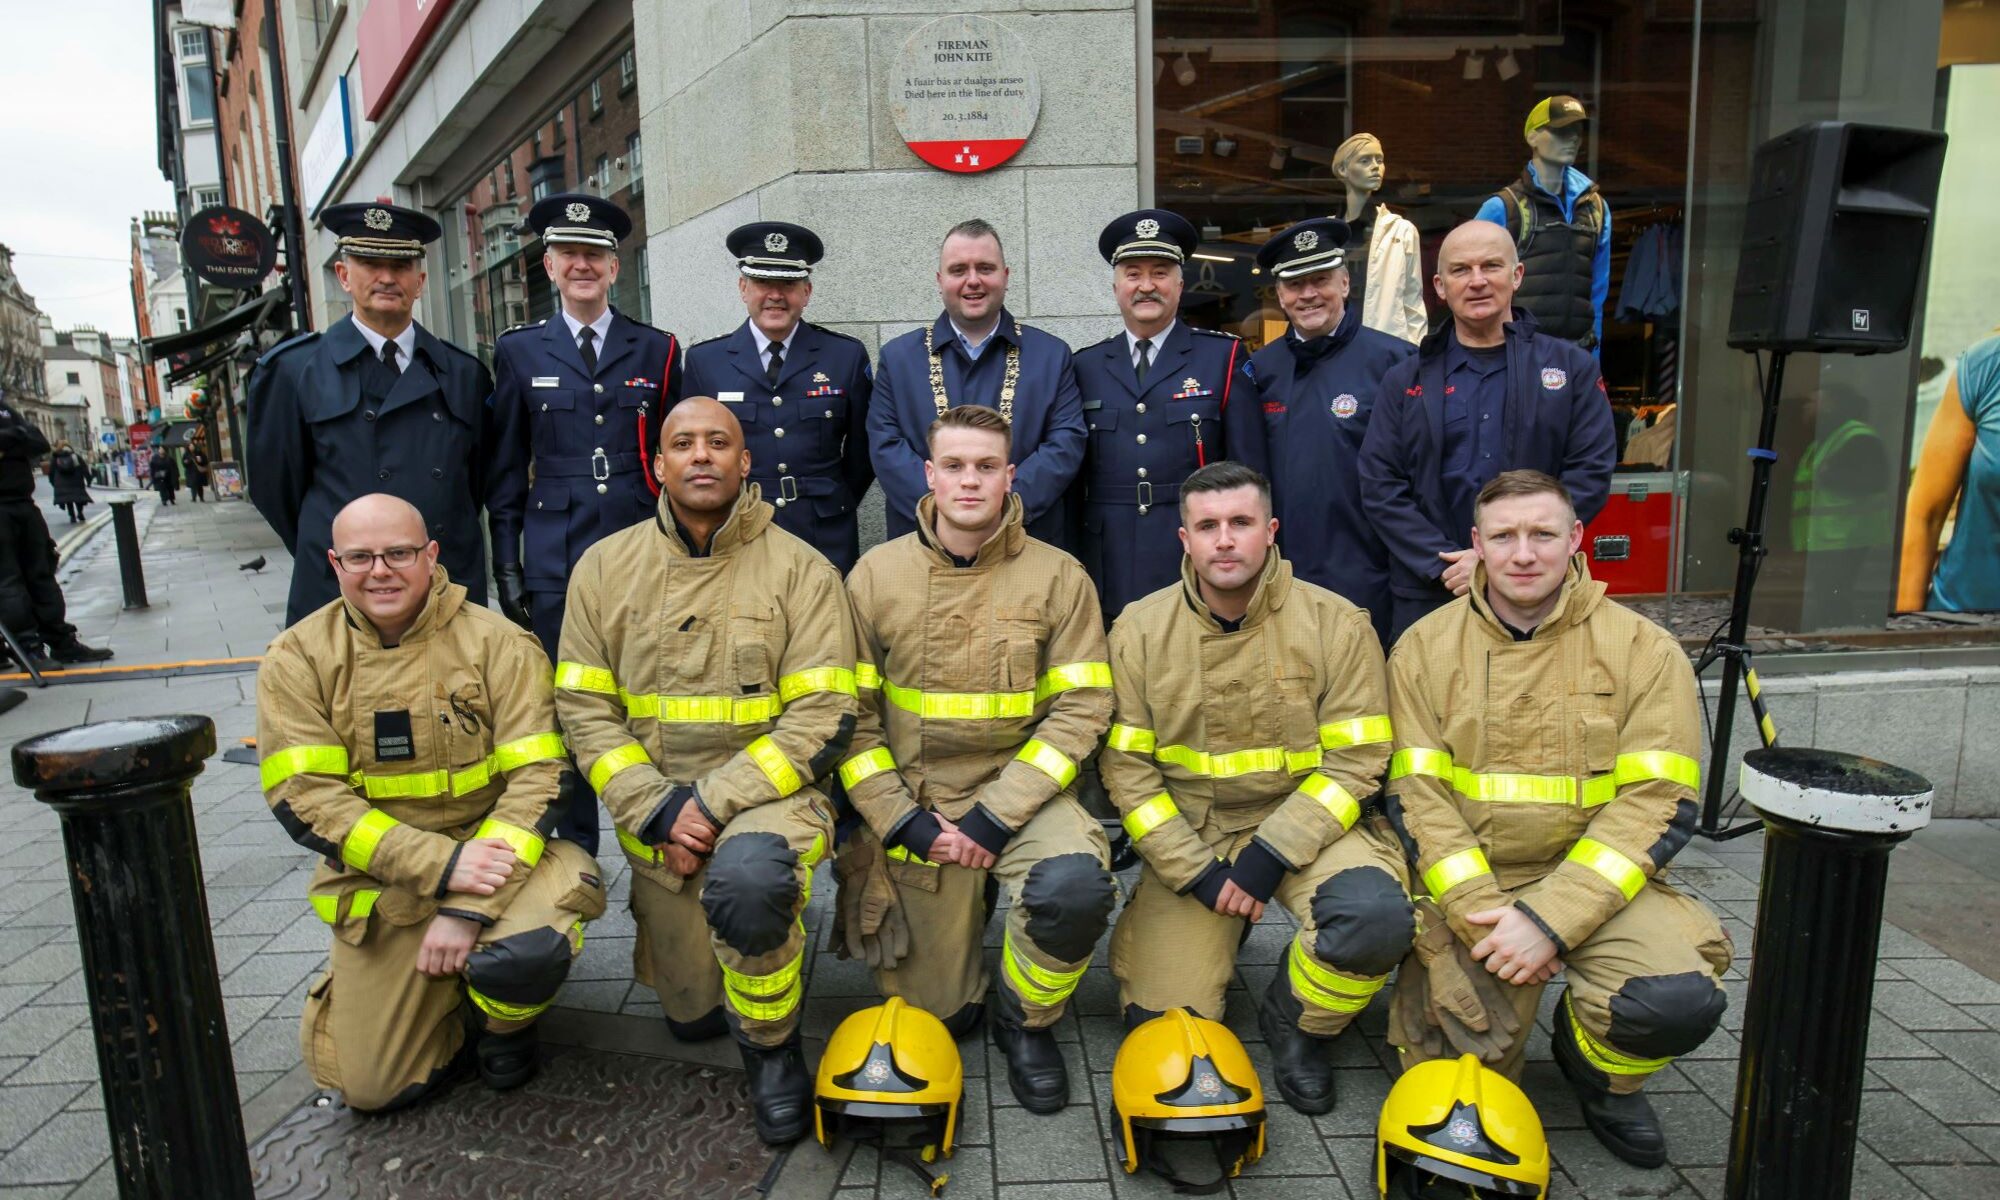 Photograph of The Lord Mayor and members of Dublin Fire Brigade at the unveiling of a Dublin City Council plaque commemorating Fireman John Kite, at Trinity Street, Dublin 2.